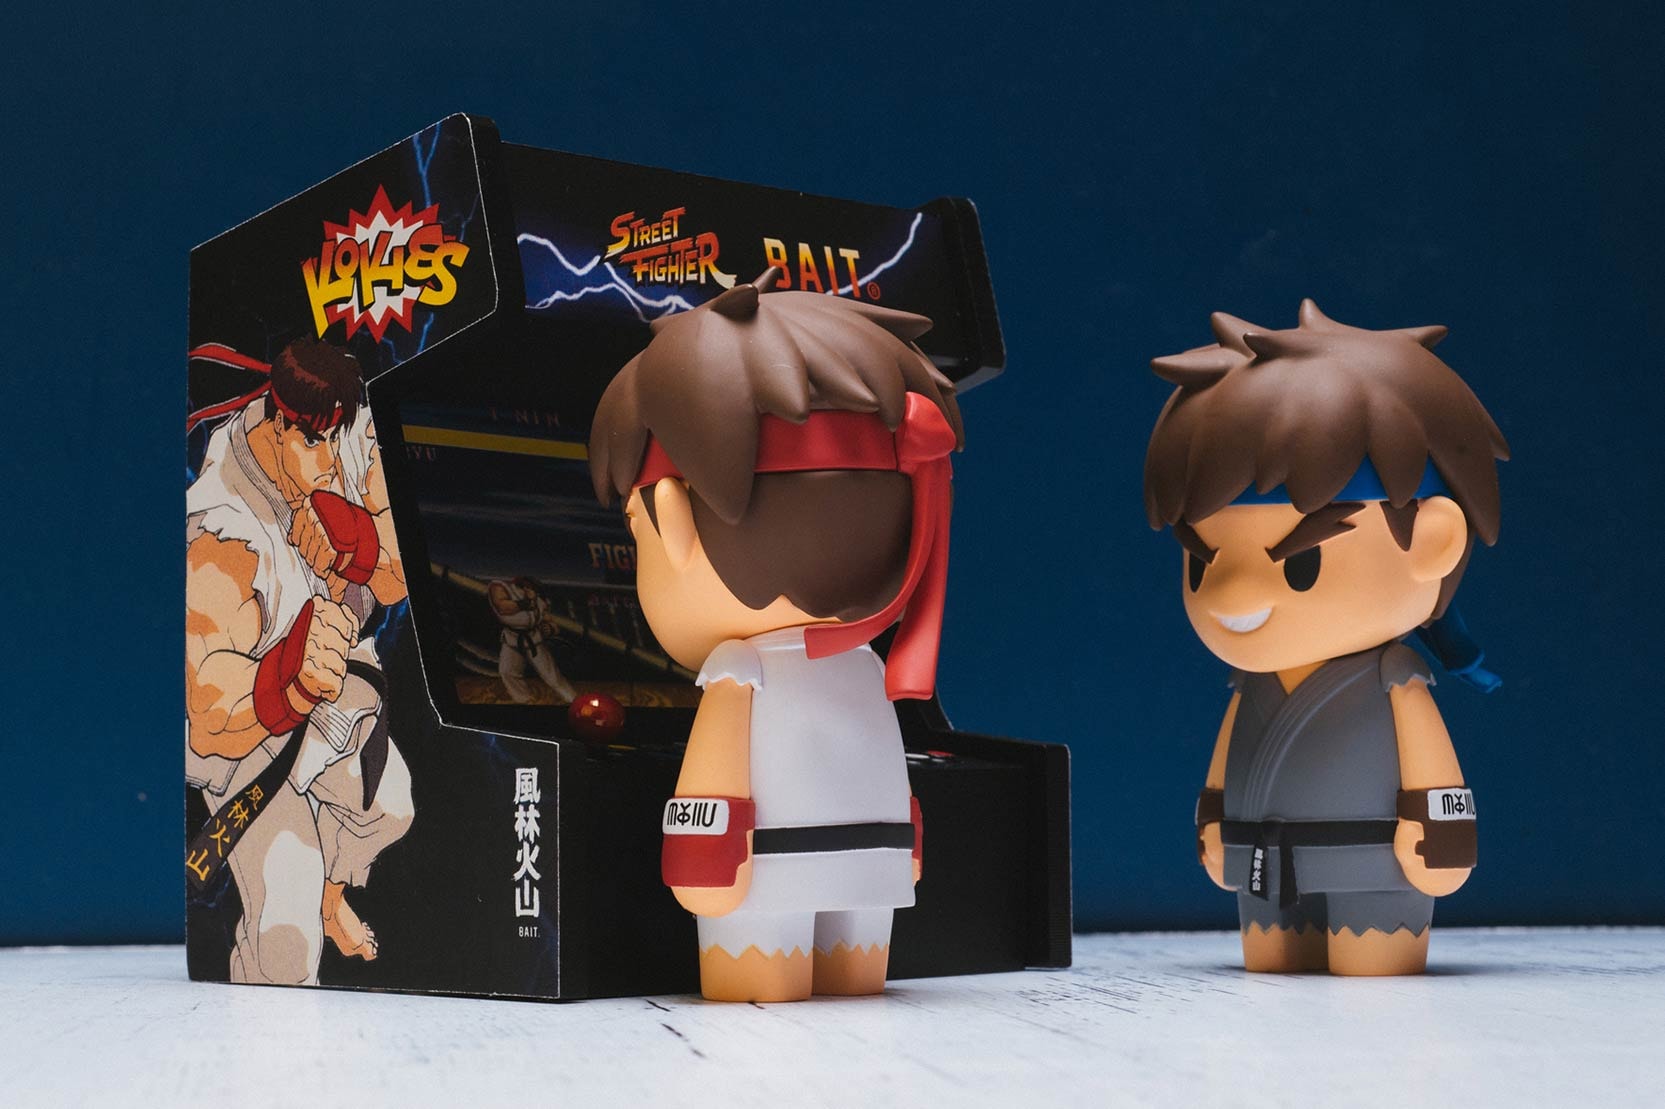 BAIT Returns With KOKIES for a New 'Street Fighter' Ryu Capsule toys figures BAIT Street Fighter Akuma Capcom video games 